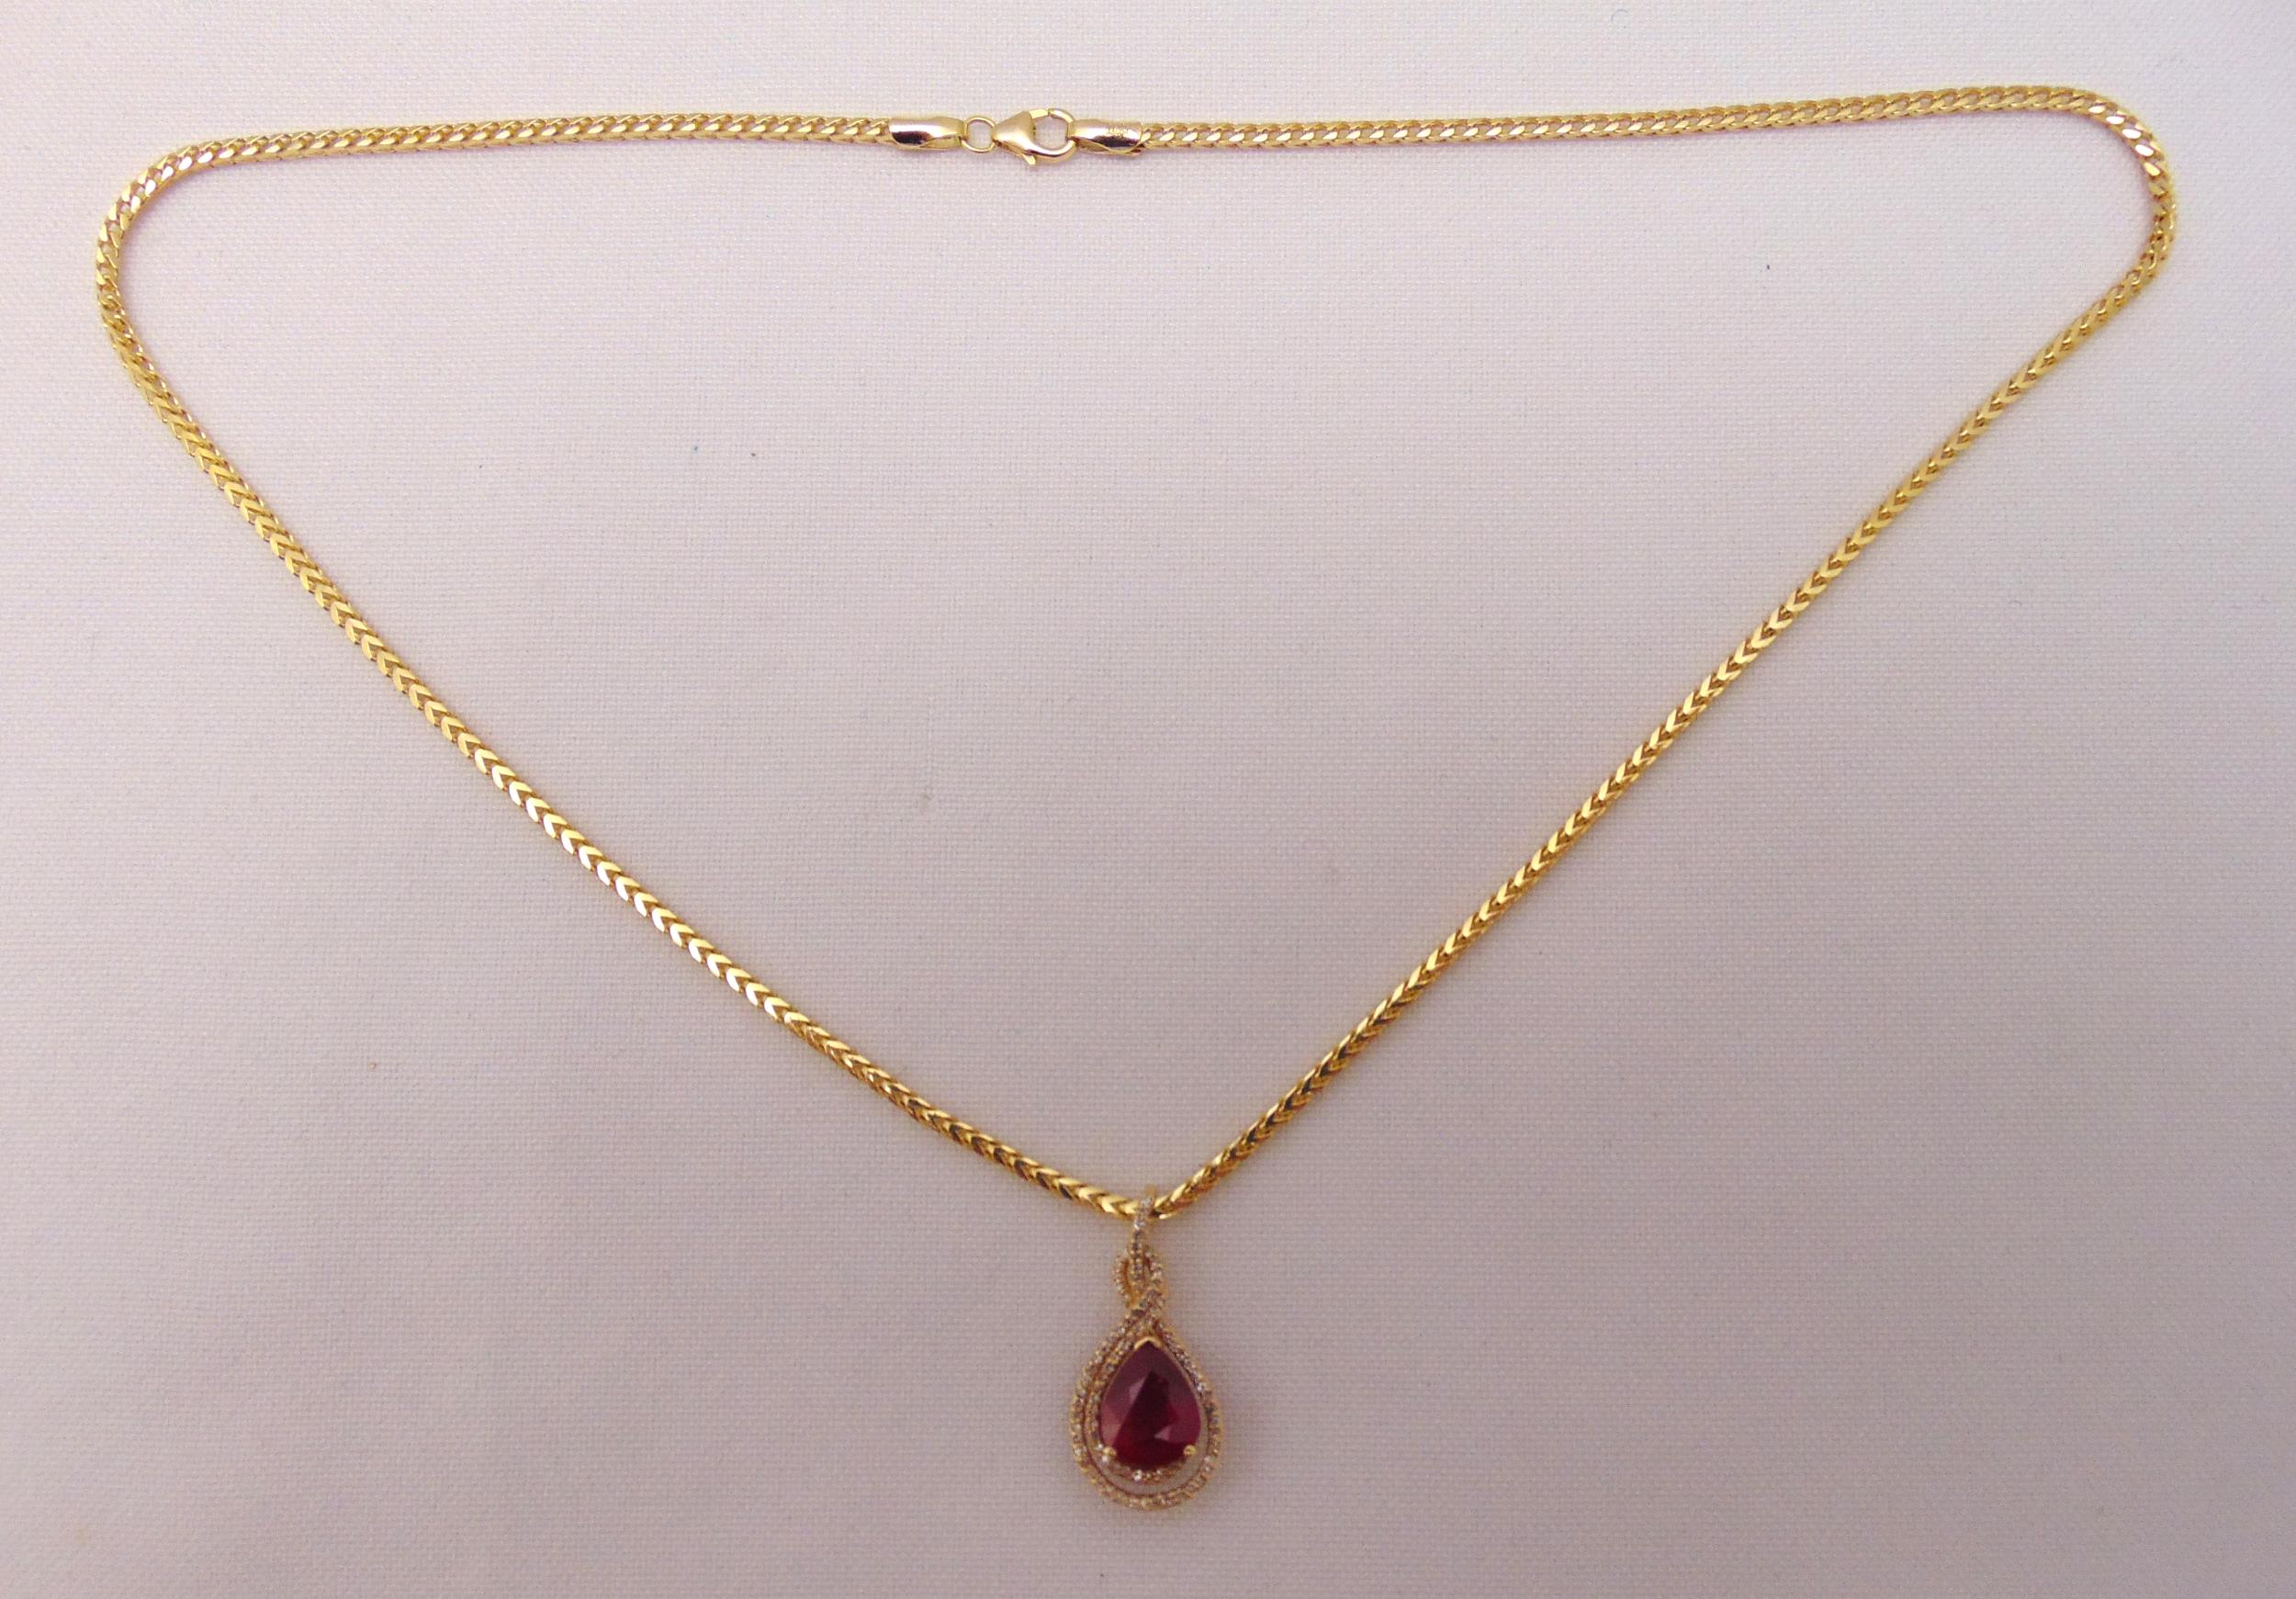 14ct yellow gold, ruby and diamond pendant on a 14ct yellow gold chain, approx total weight 11.6g